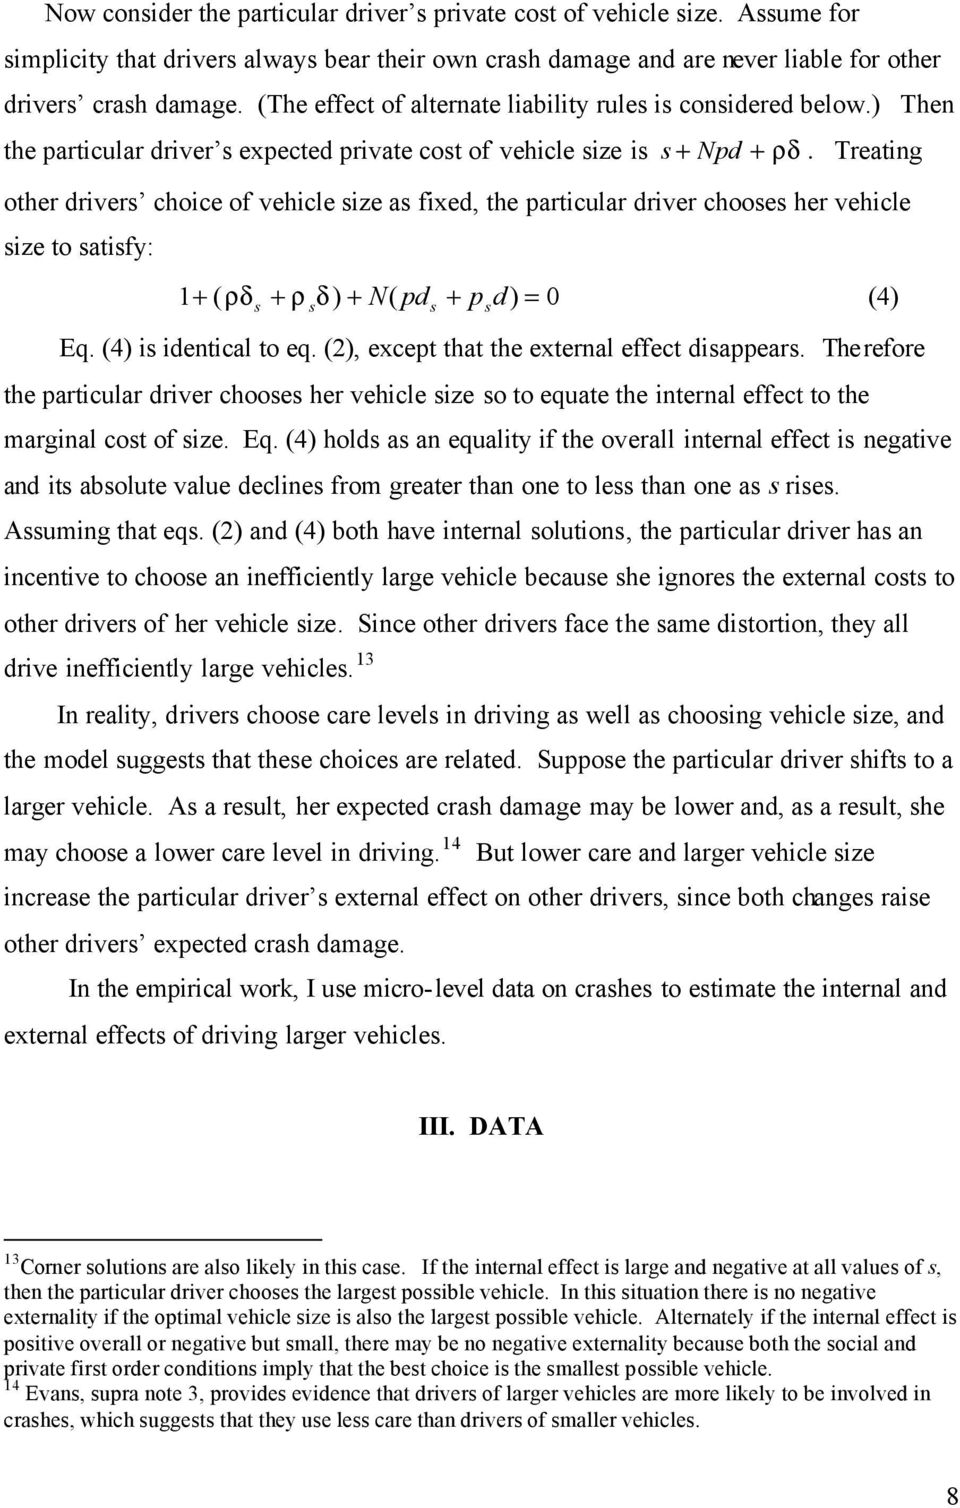 Treating other driver choice of vehicle ize a fixed, the particular driver chooe her vehicle ize to atify: 1 + ( ρδ + ρ δ ) + N( pd + p d) = 0 (4) Eq. (4) i identical to eq.